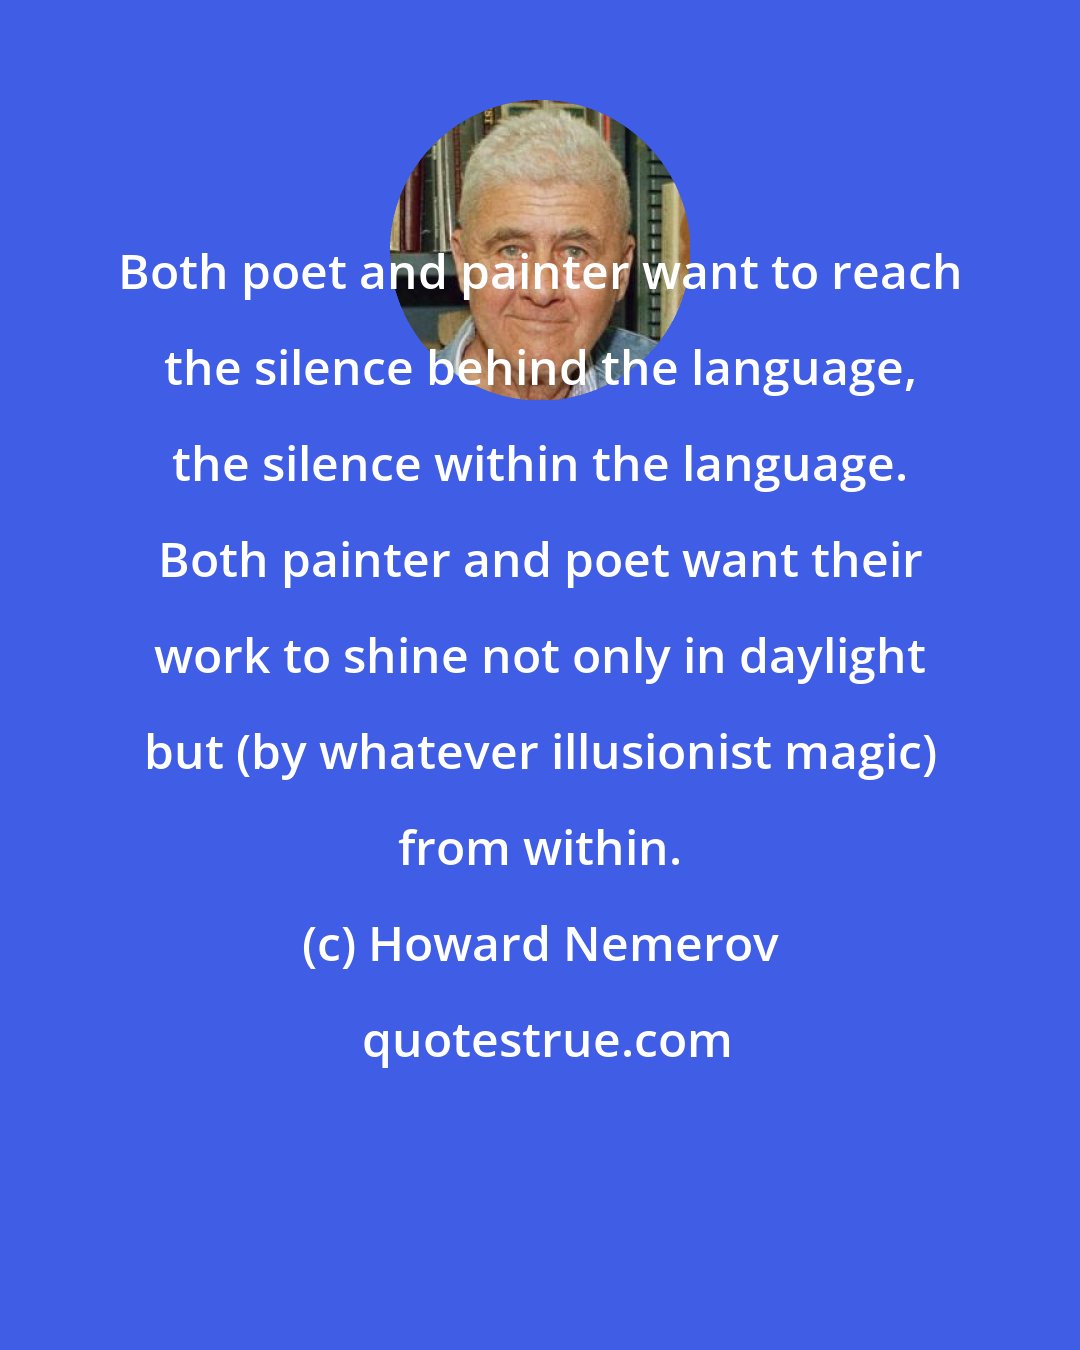 Howard Nemerov: Both poet and painter want to reach the silence behind the language, the silence within the language. Both painter and poet want their work to shine not only in daylight but (by whatever illusionist magic) from within.